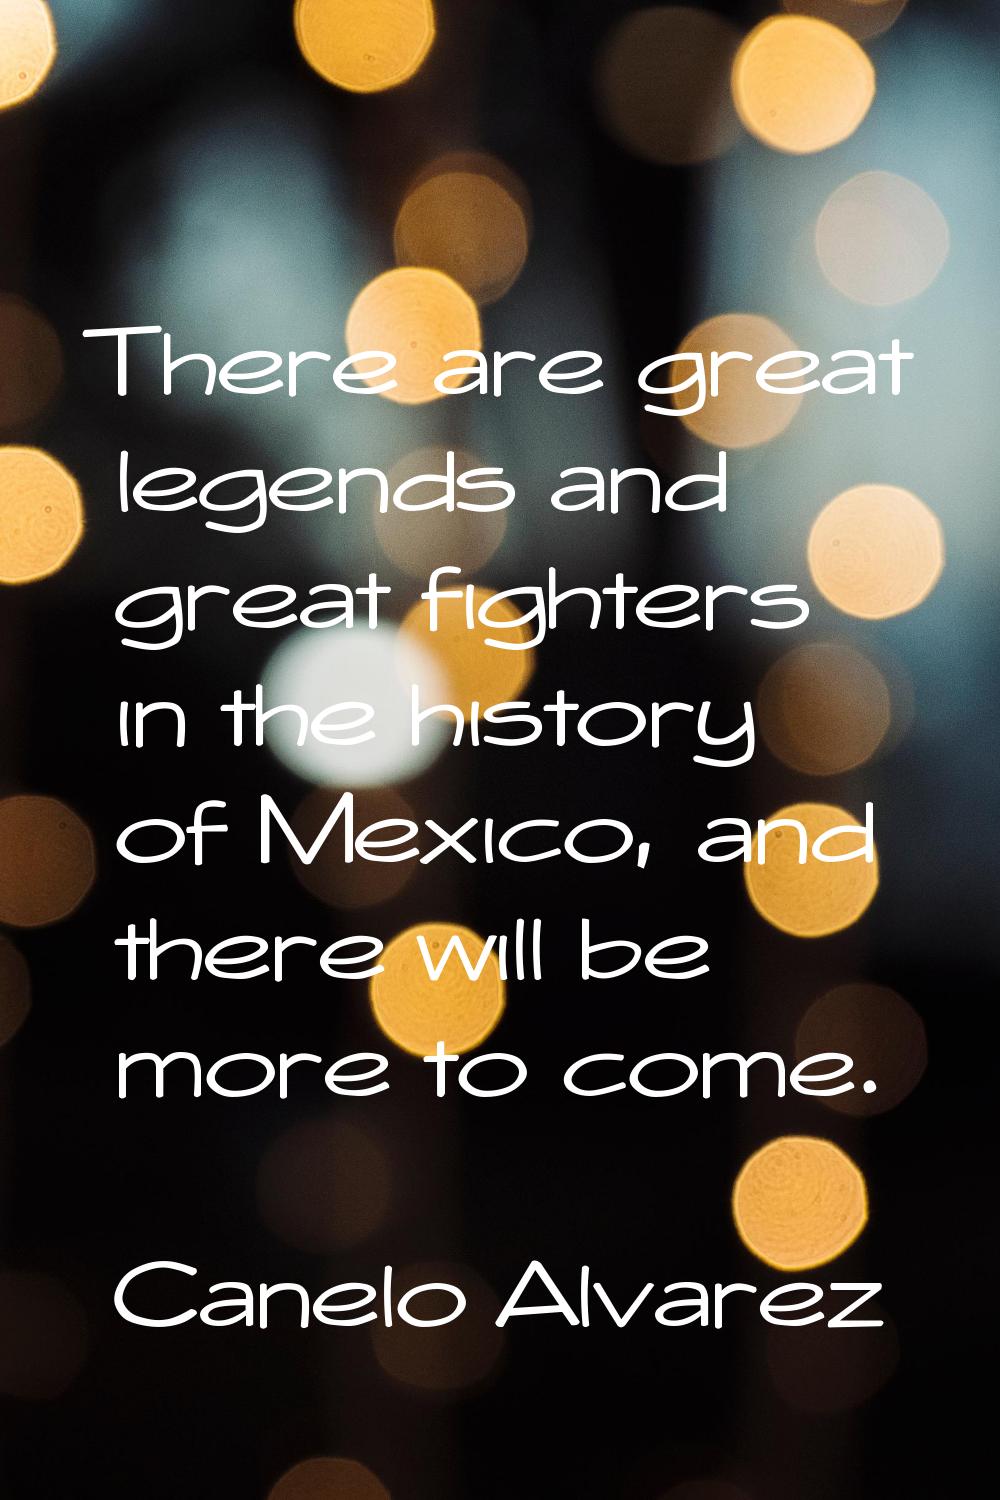 There are great legends and great fighters in the history of Mexico, and there will be more to come